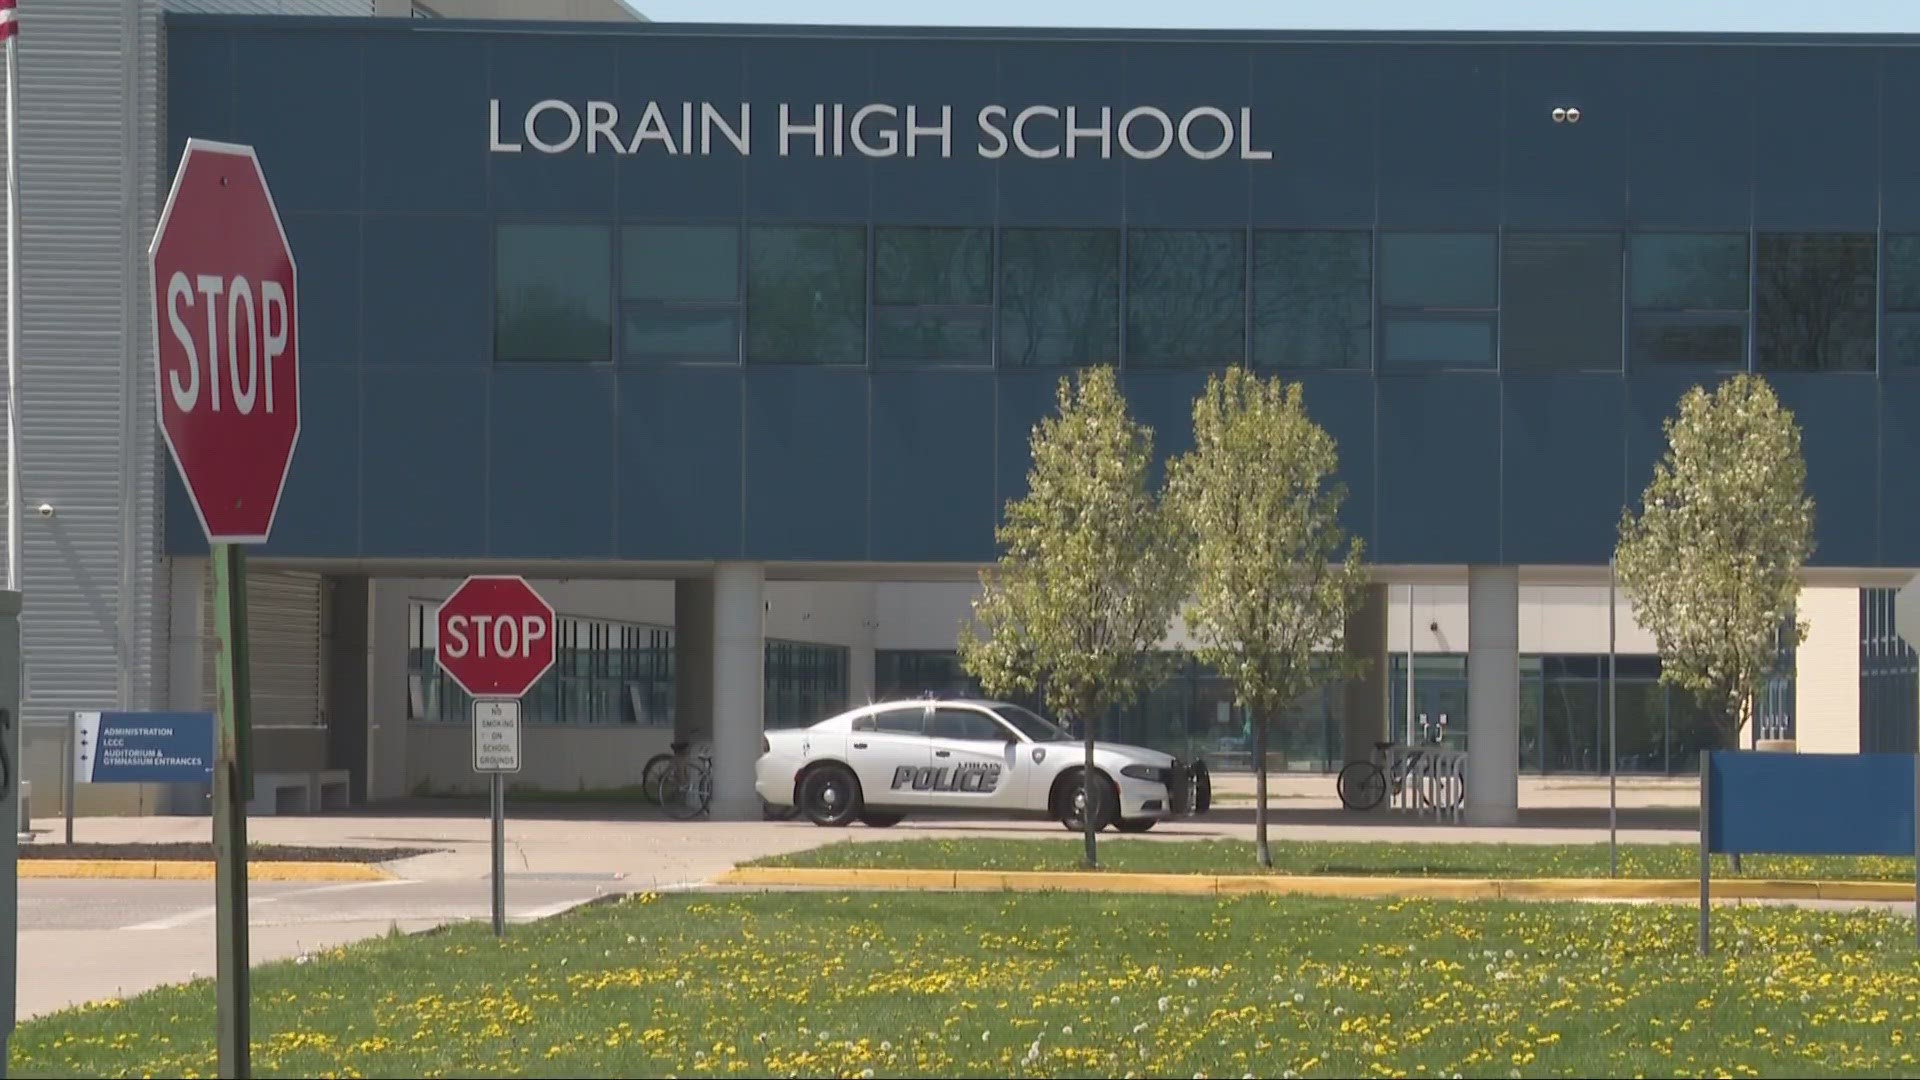 Lorain police confirmed with 3News that an investigation is underway regarding an apparent inappropriate phone call between a teacher and a student.